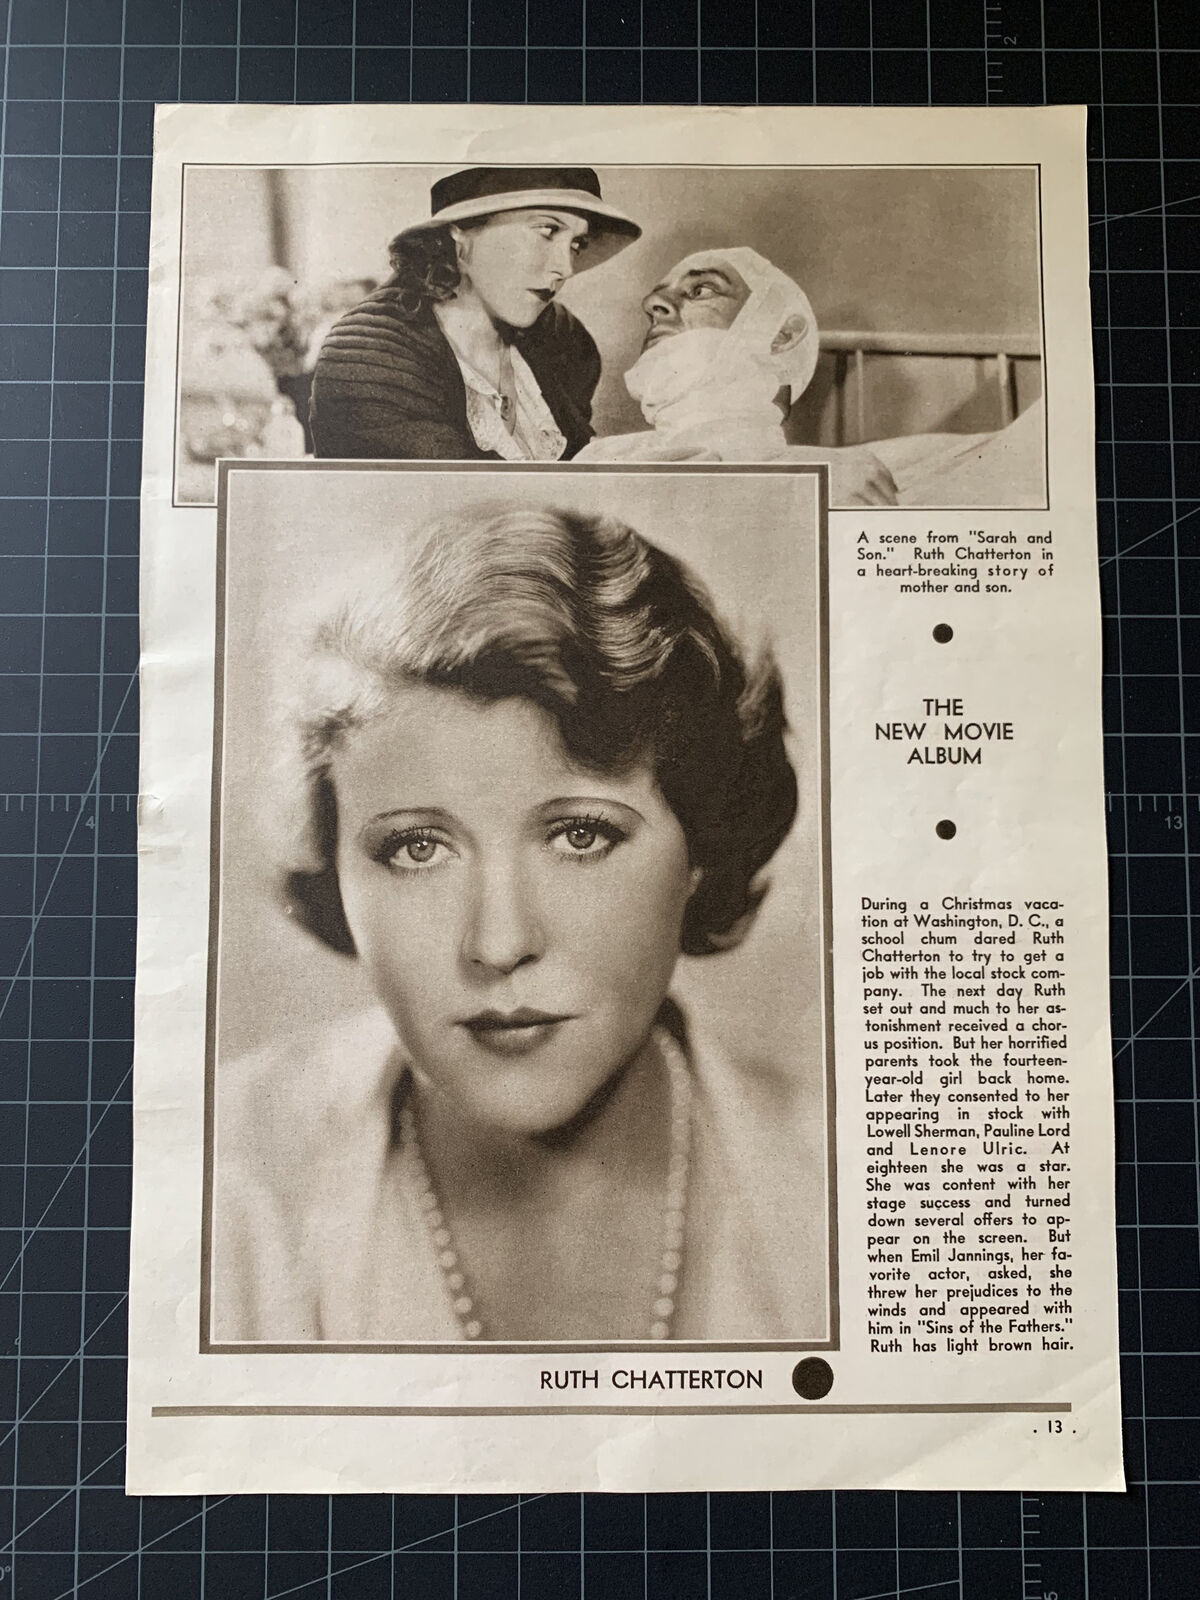 Vintage Circa 1930 Hollywood Star Portrait Page - Ruth Chatterton